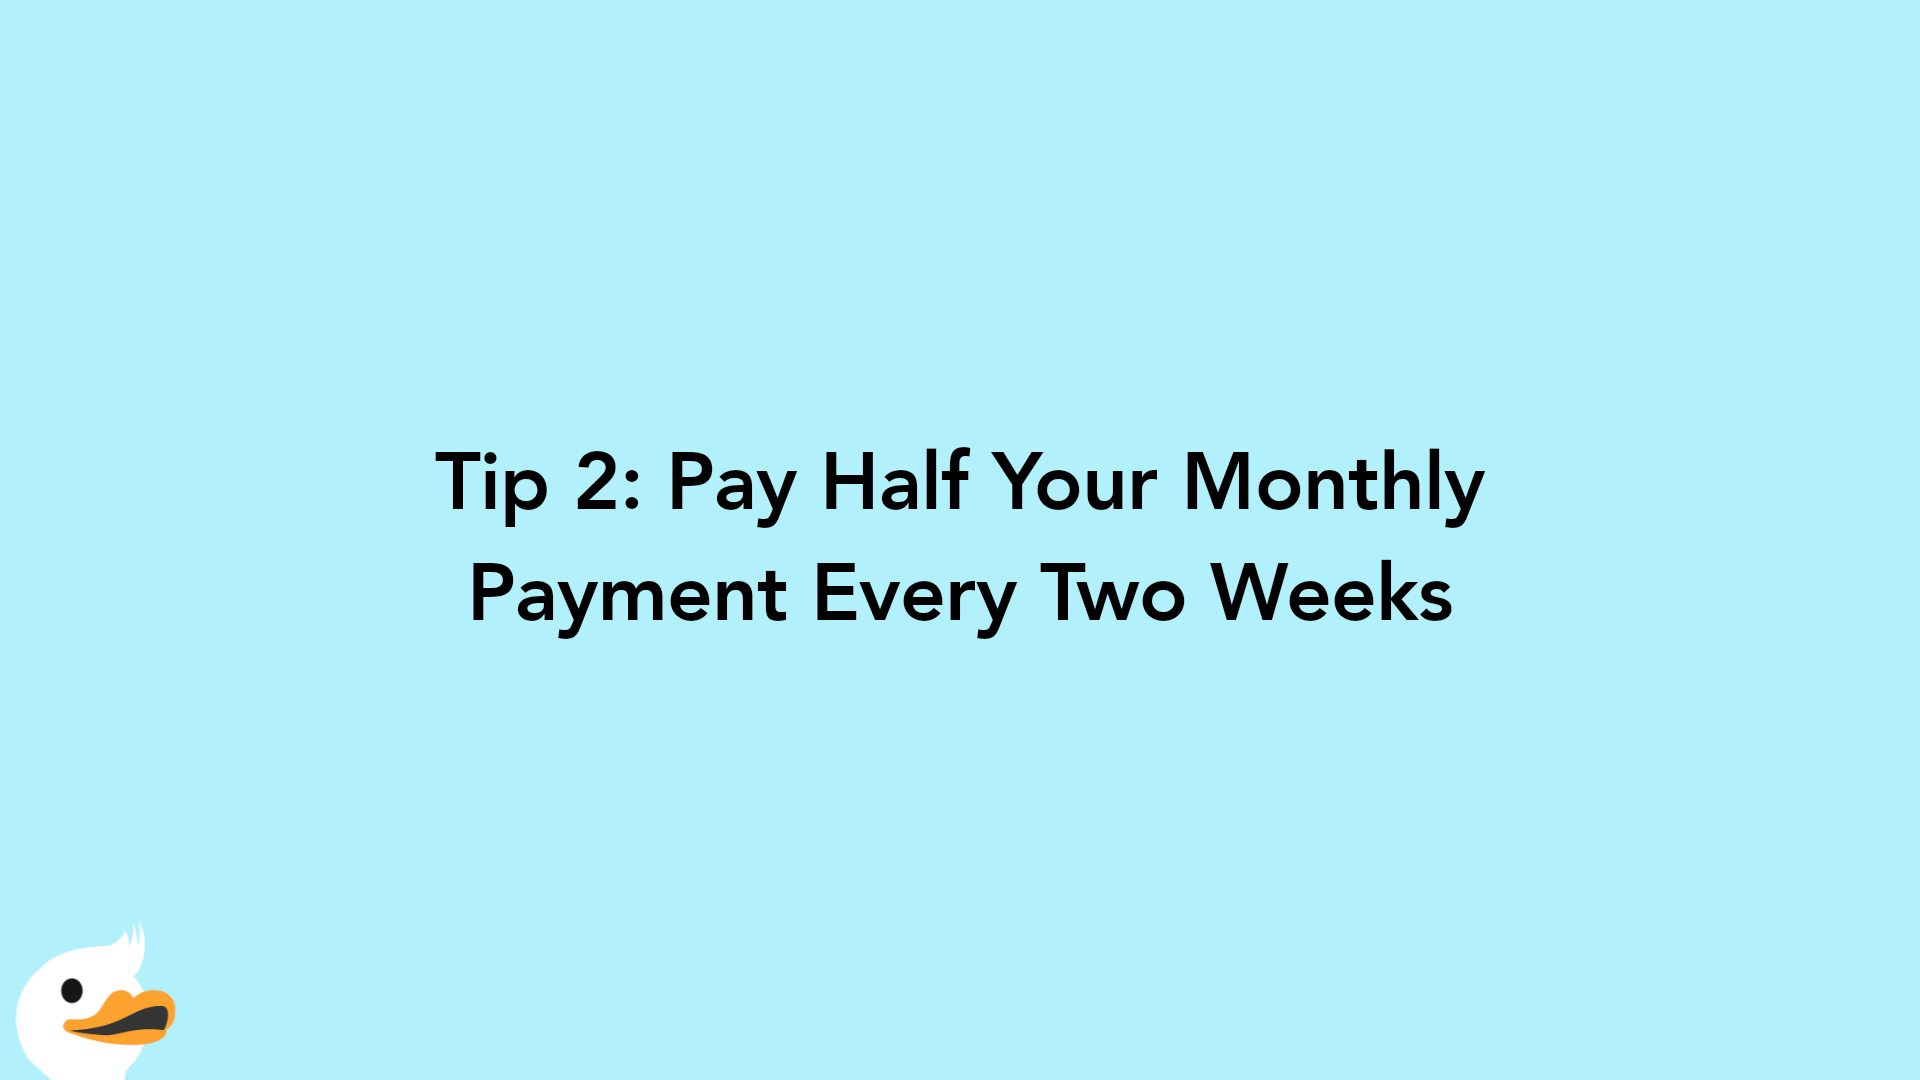 Tip 2: Pay Half Your Monthly Payment Every Two Weeks